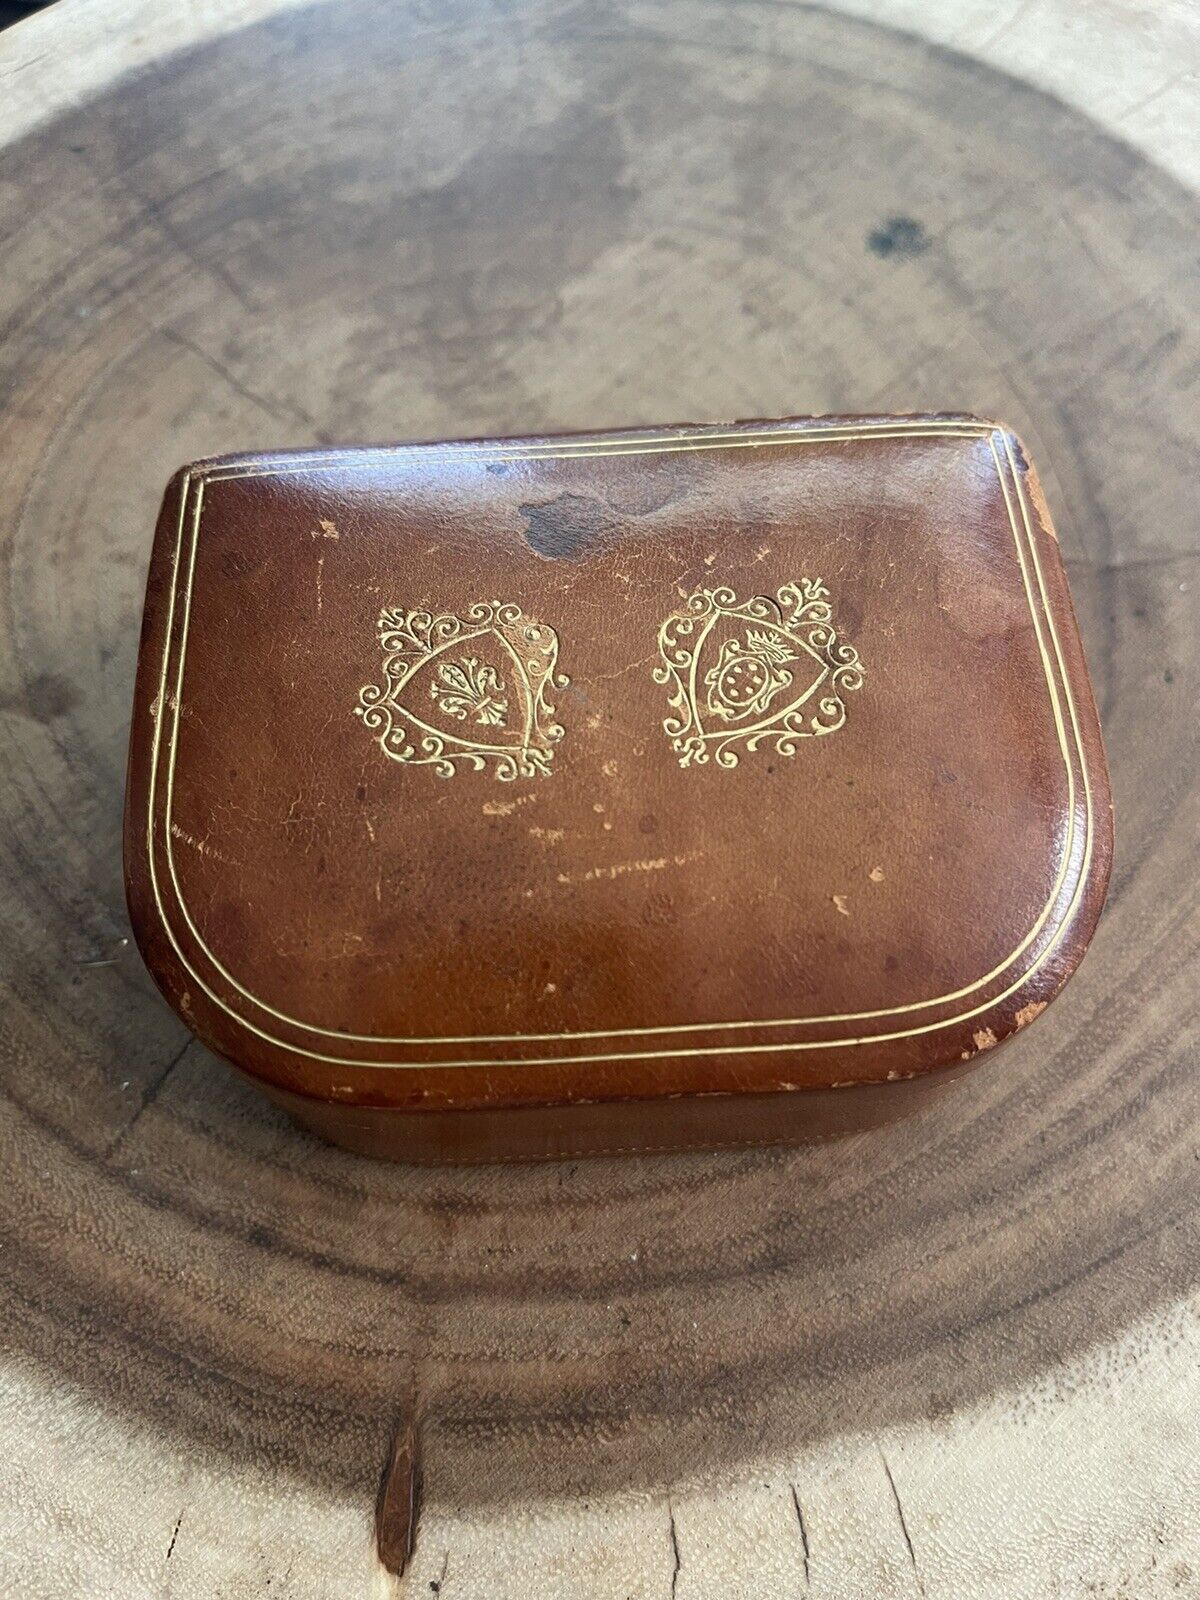 Vintage Fomerz Italy Brown Leather Gilt Crests Jewelry Trinkets Box Velour 3.5”